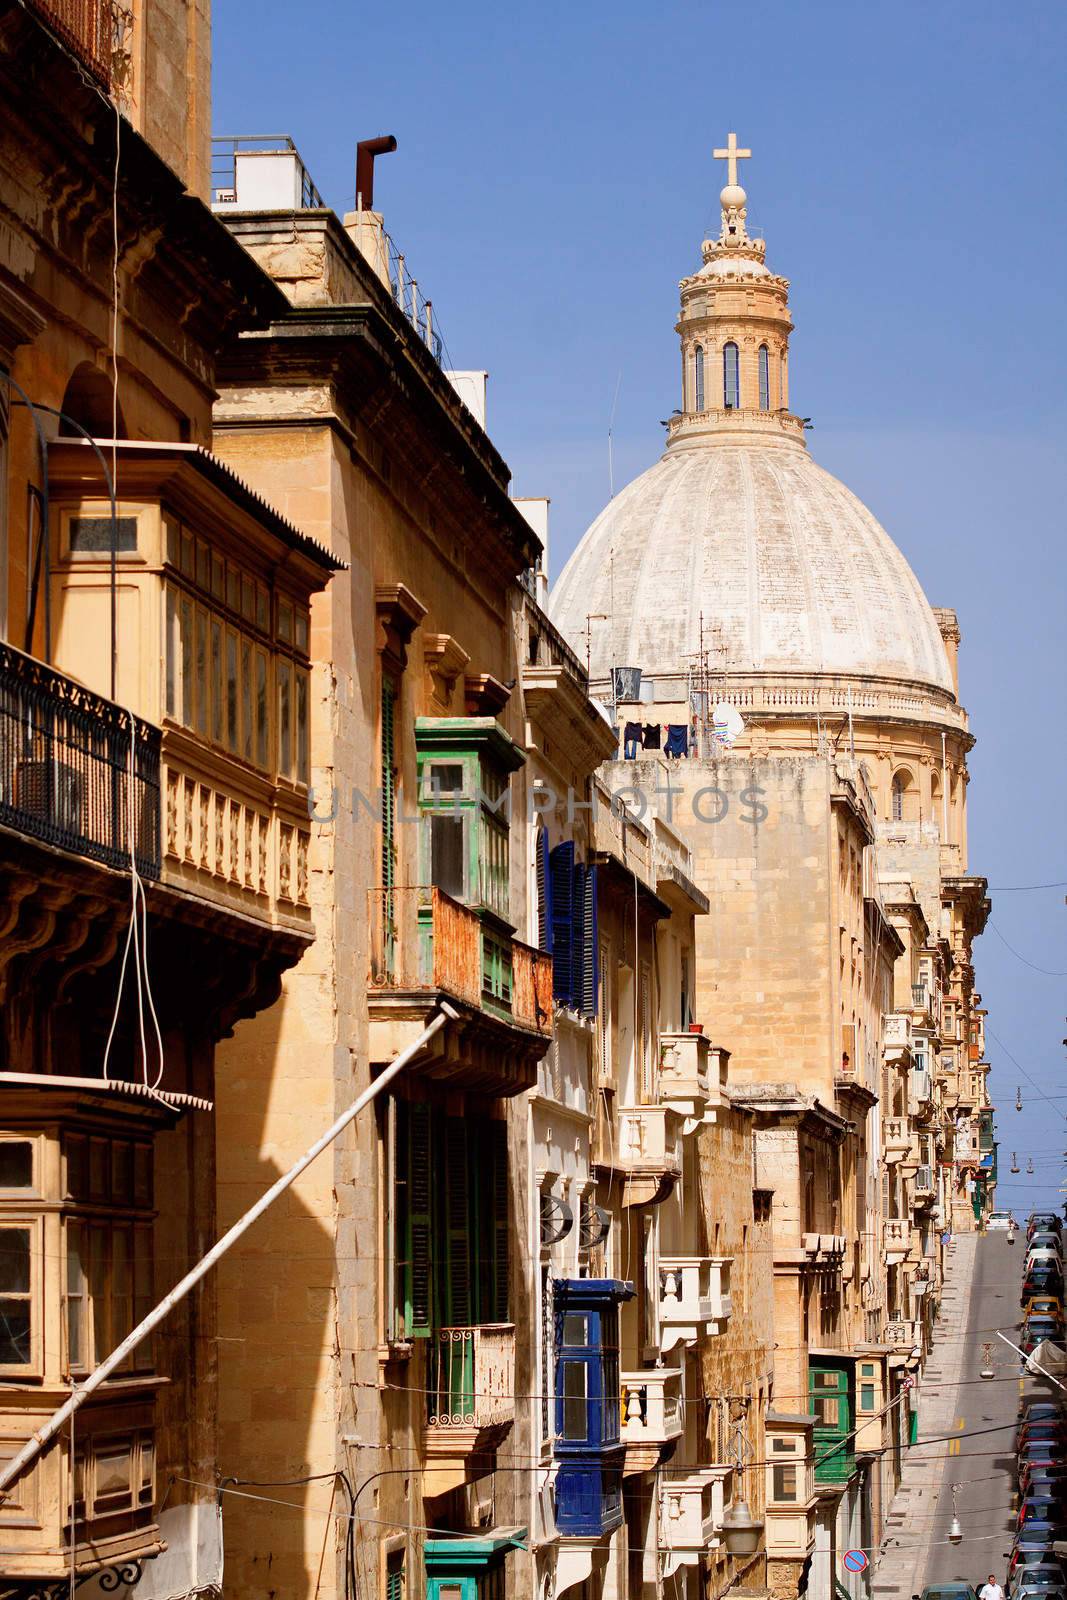 A church and street in the capital of Malta, Valletta